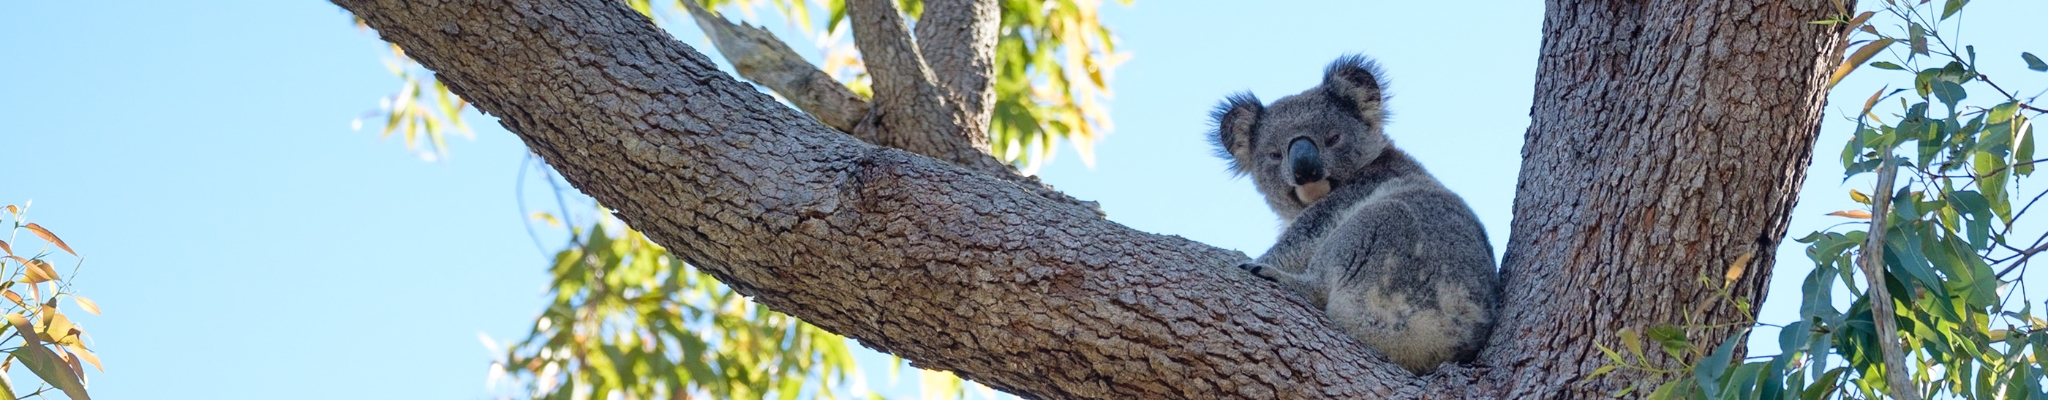 A koala sits high in the fork of large tree